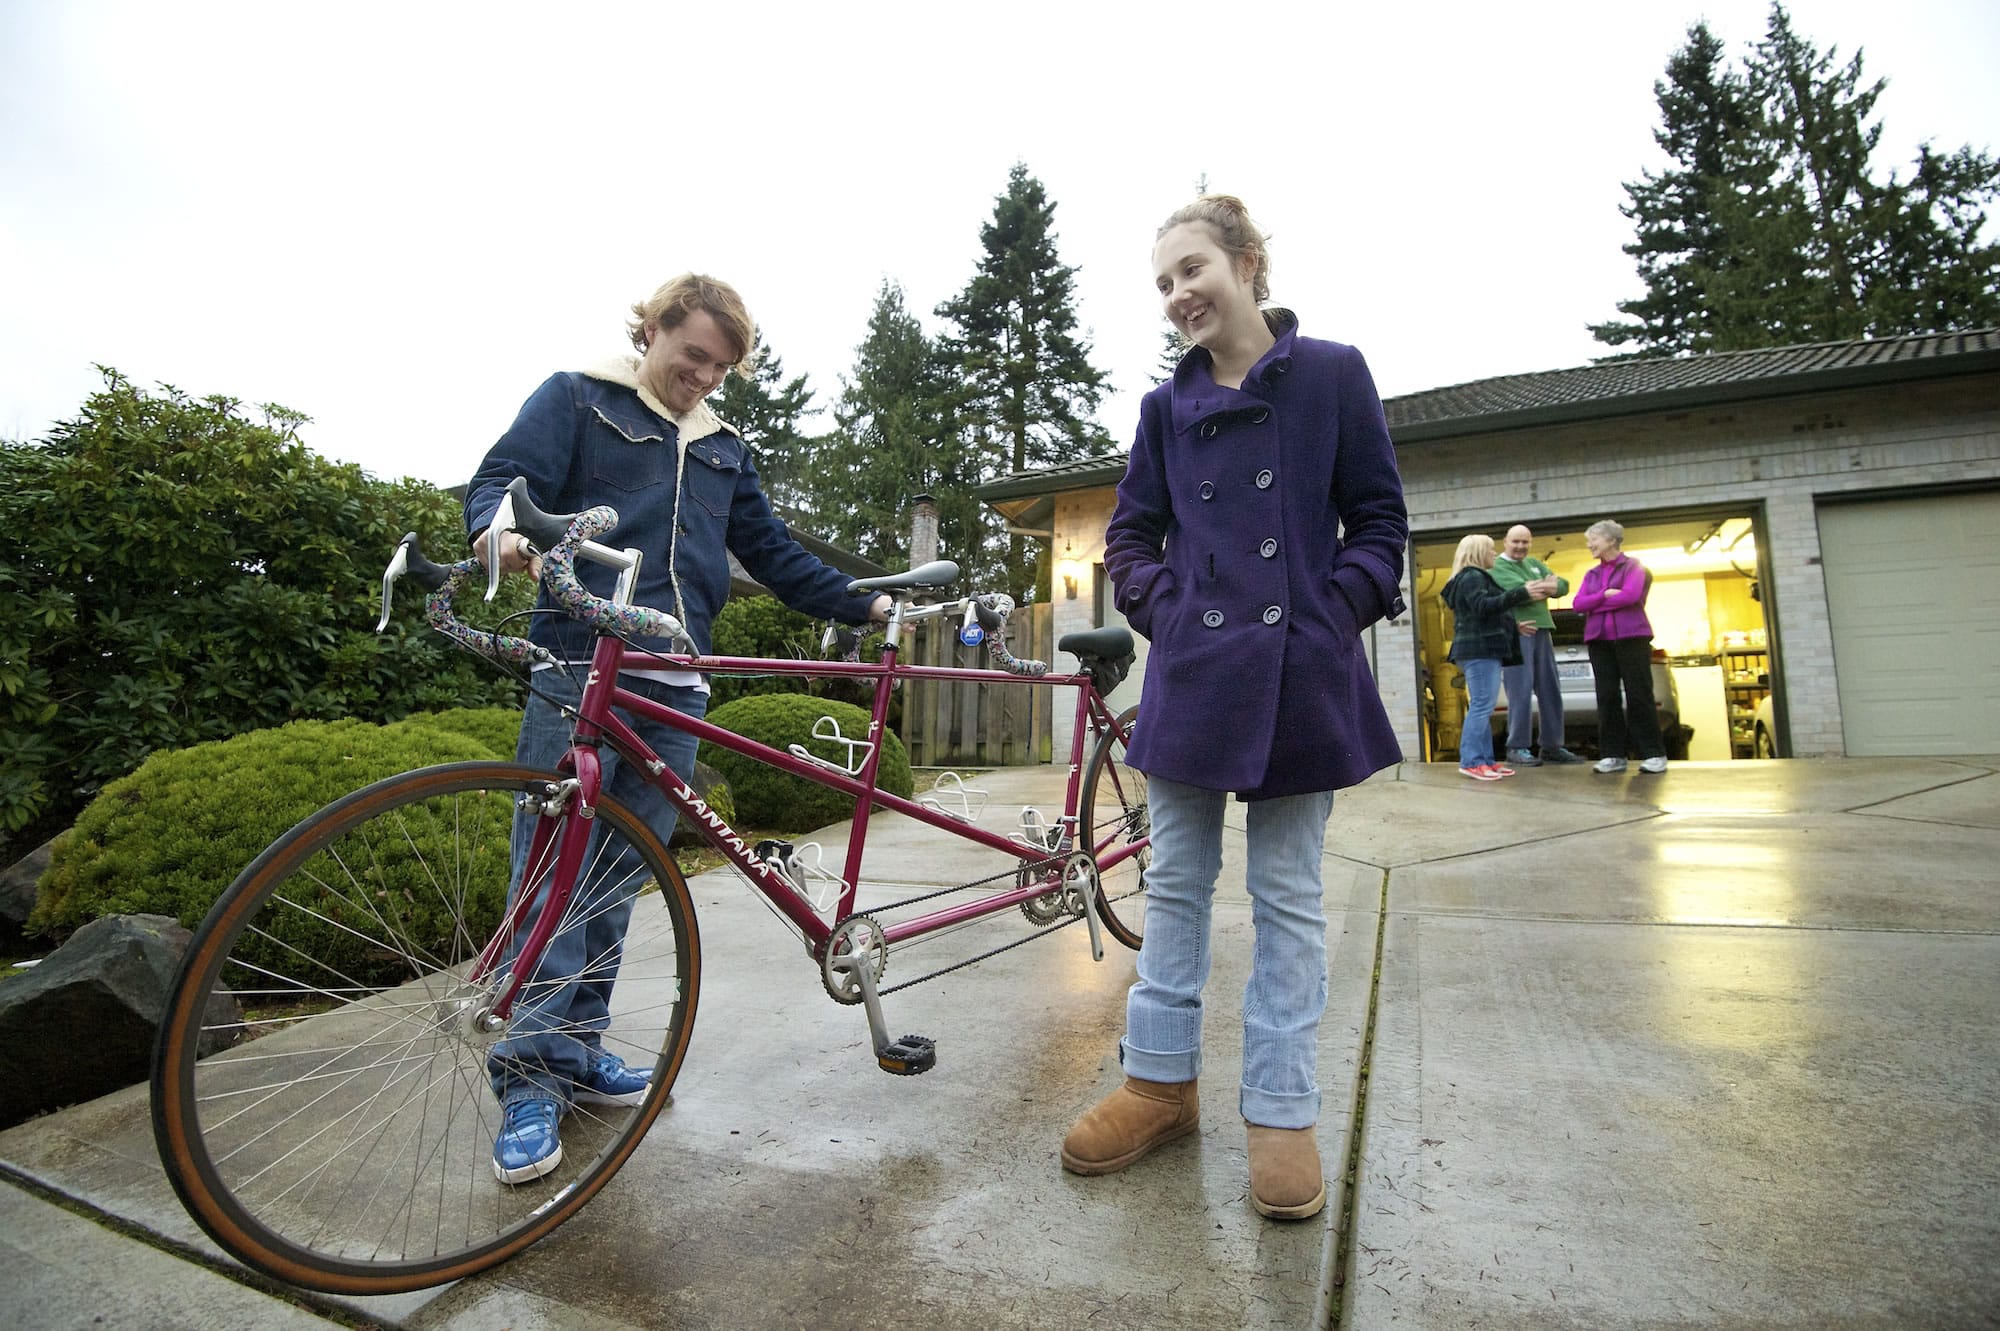 Harly and Courtney Forbes smile as they admire their new tandem bicycle given to them by Jackie and Richard Riordan on Tuesday in Vancouver. The Riordan's gave the bike to Harly and Courtney after their tandem bike was stolen the day before.